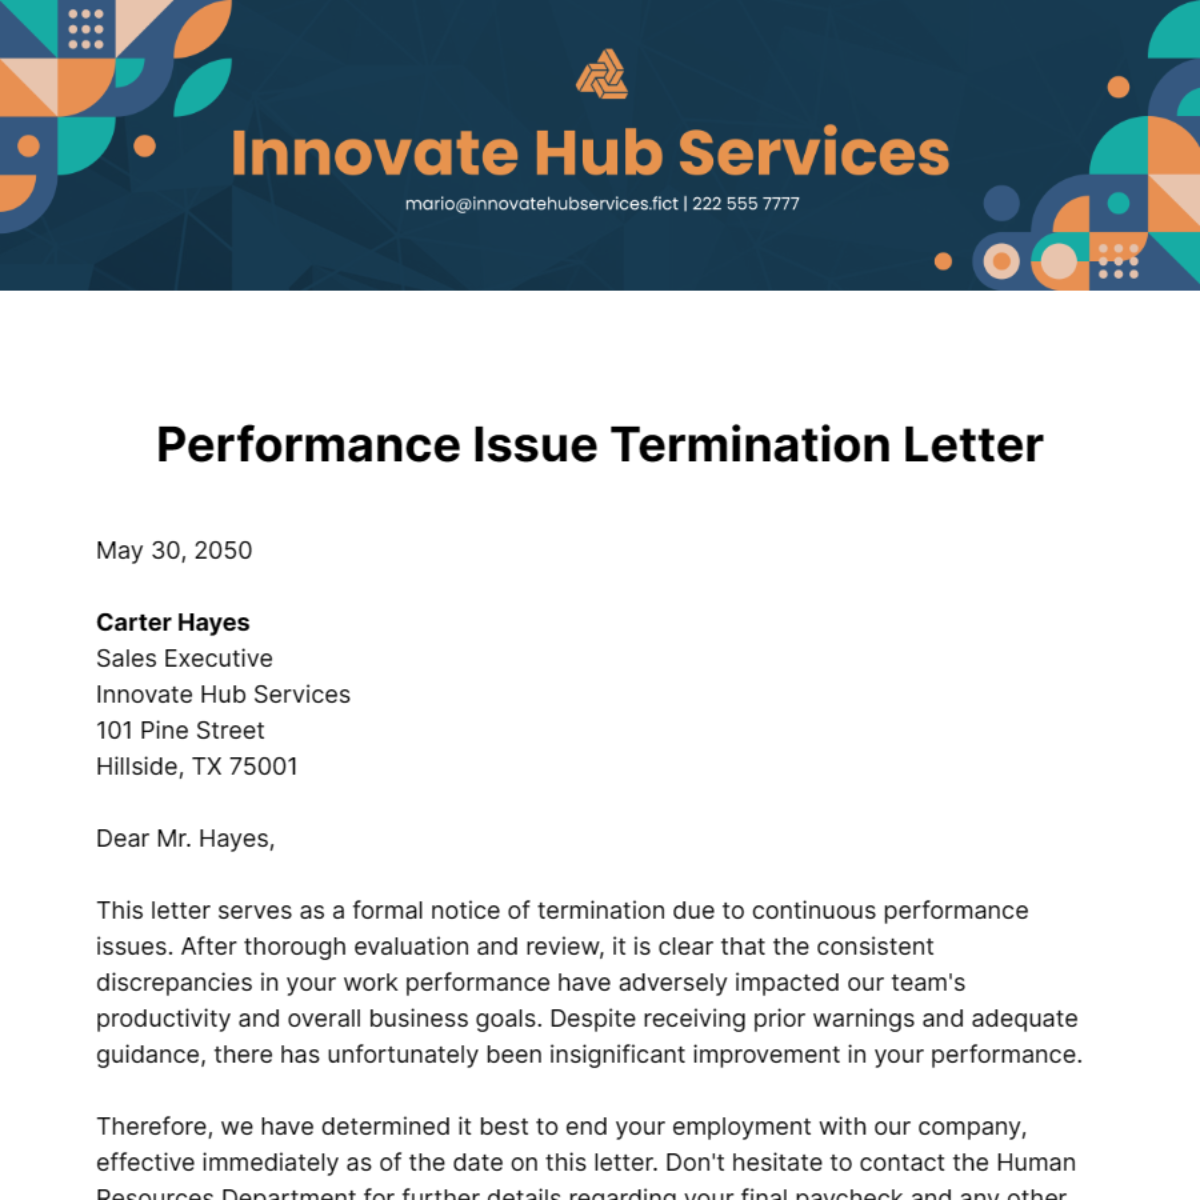 Performance Issue Termination Letter Template